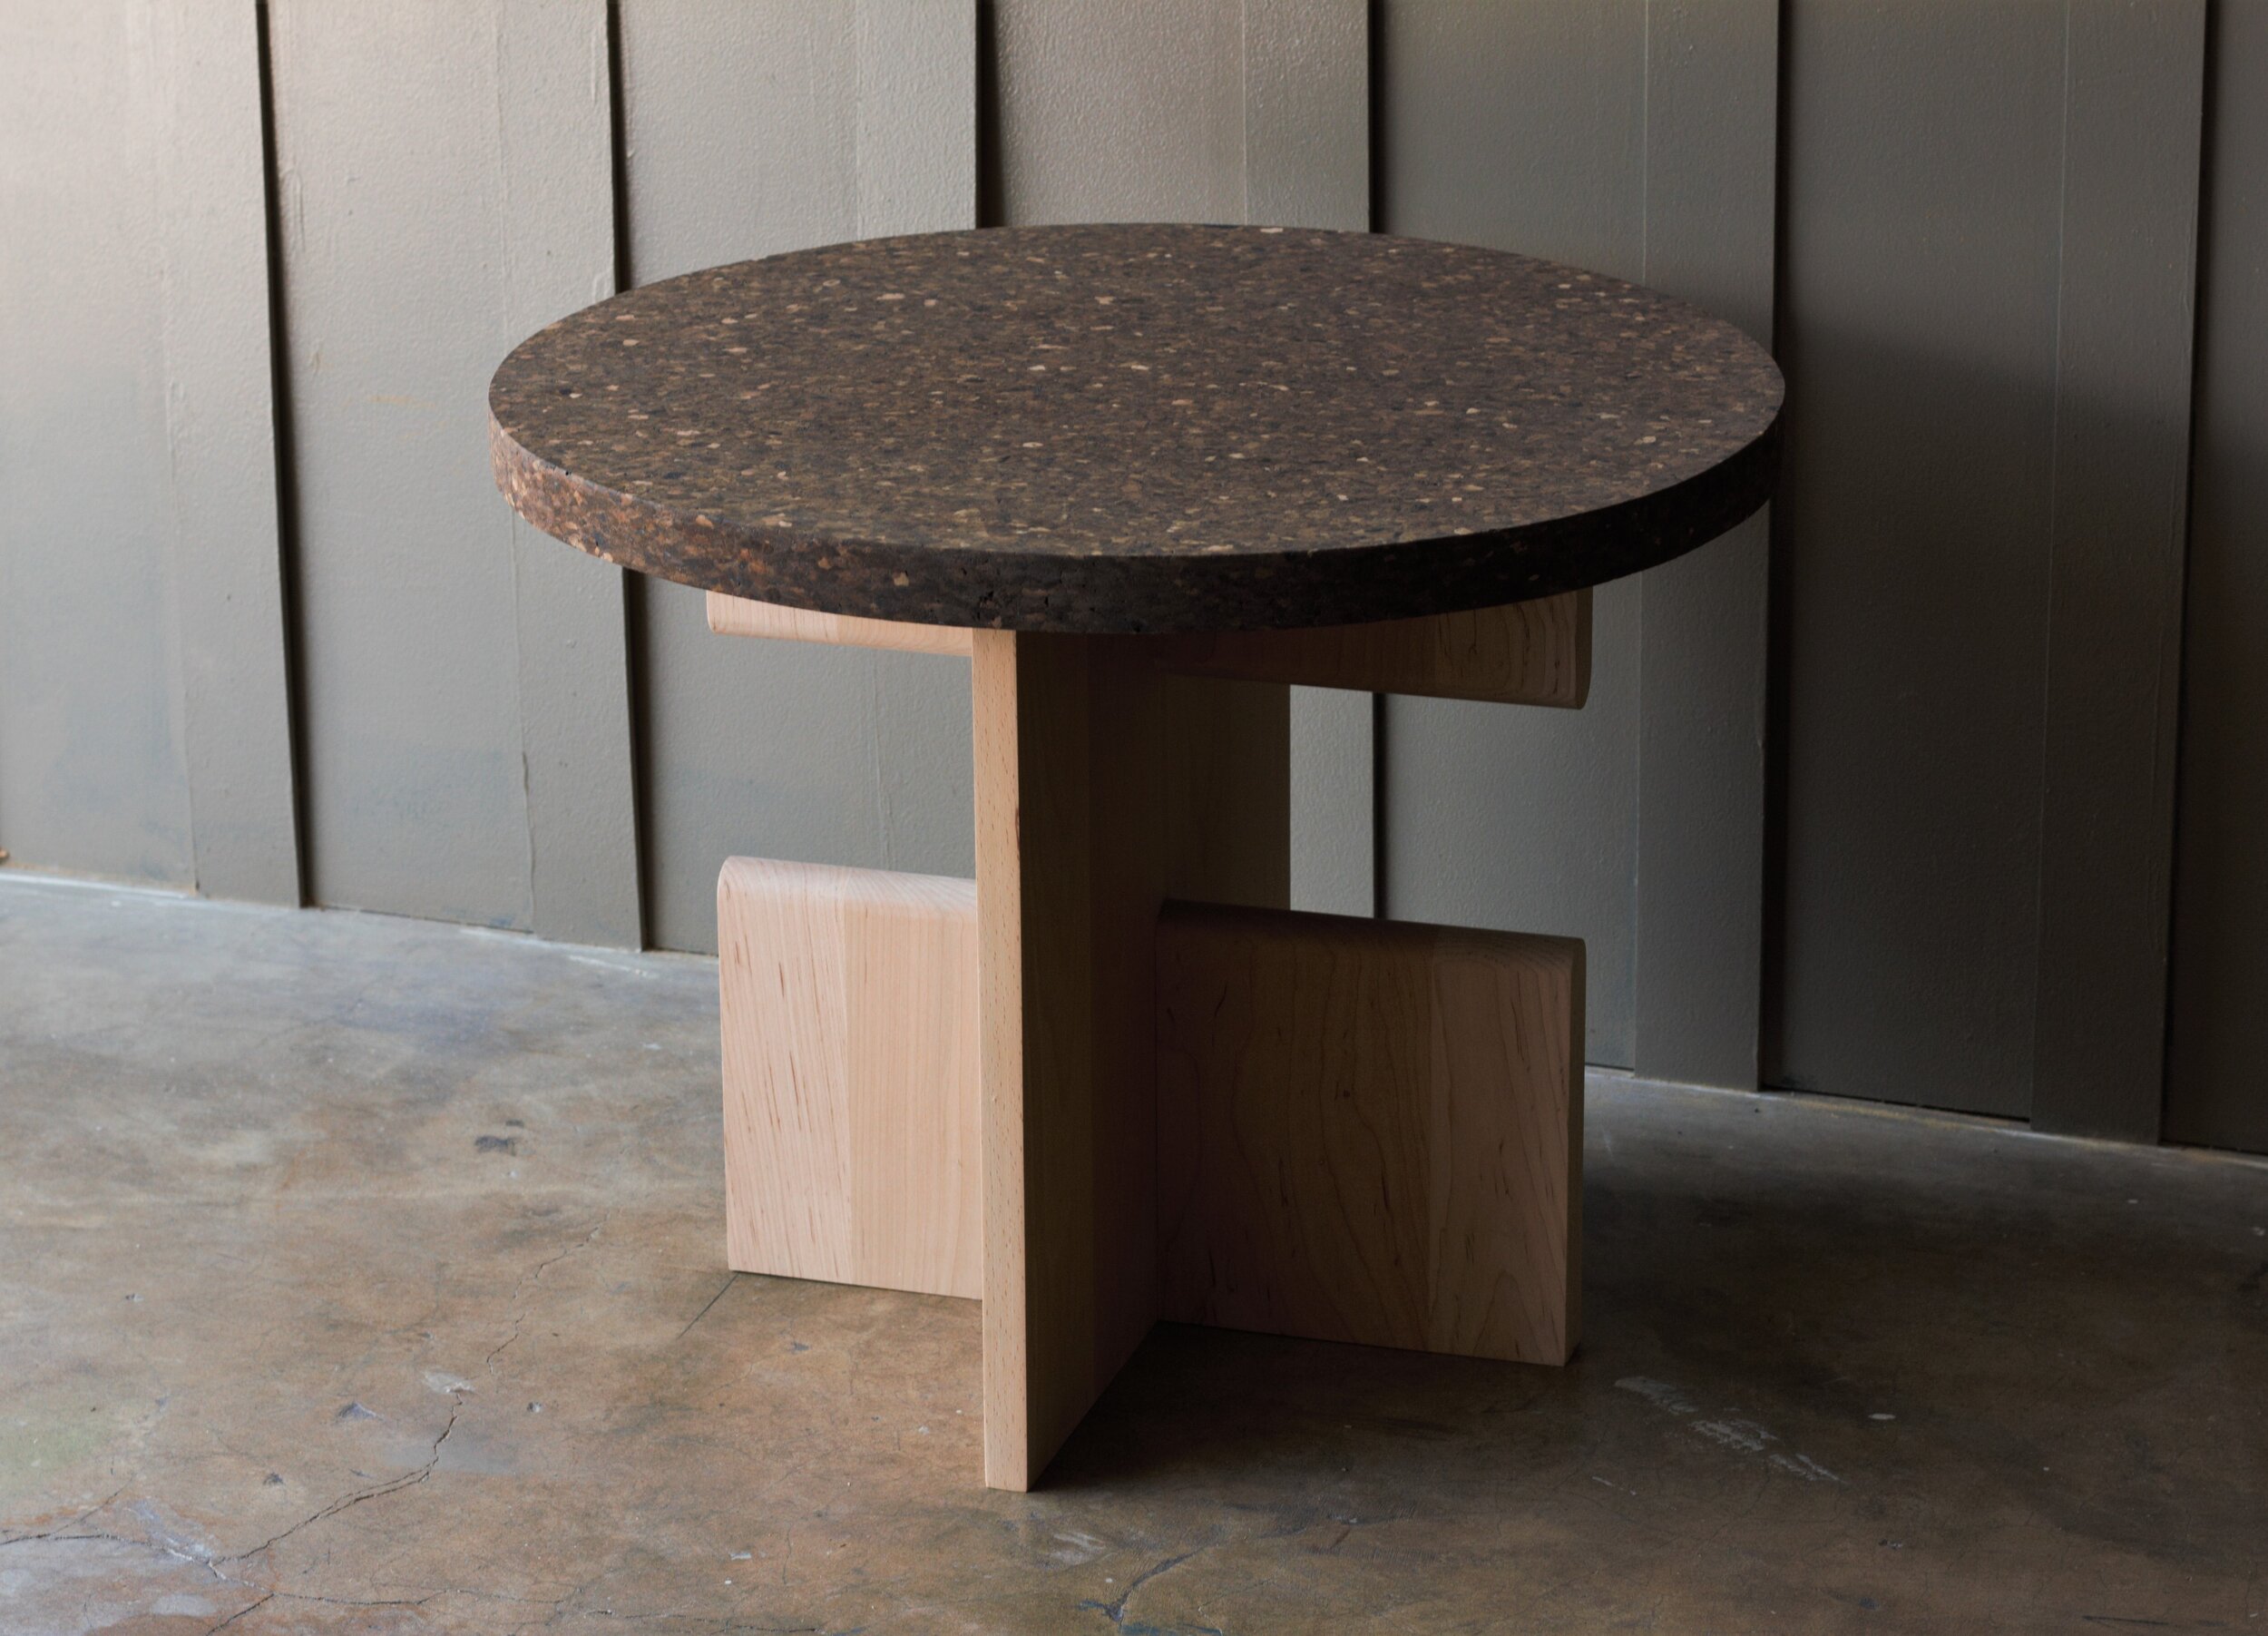 OXER SIDE TABLE | 2019